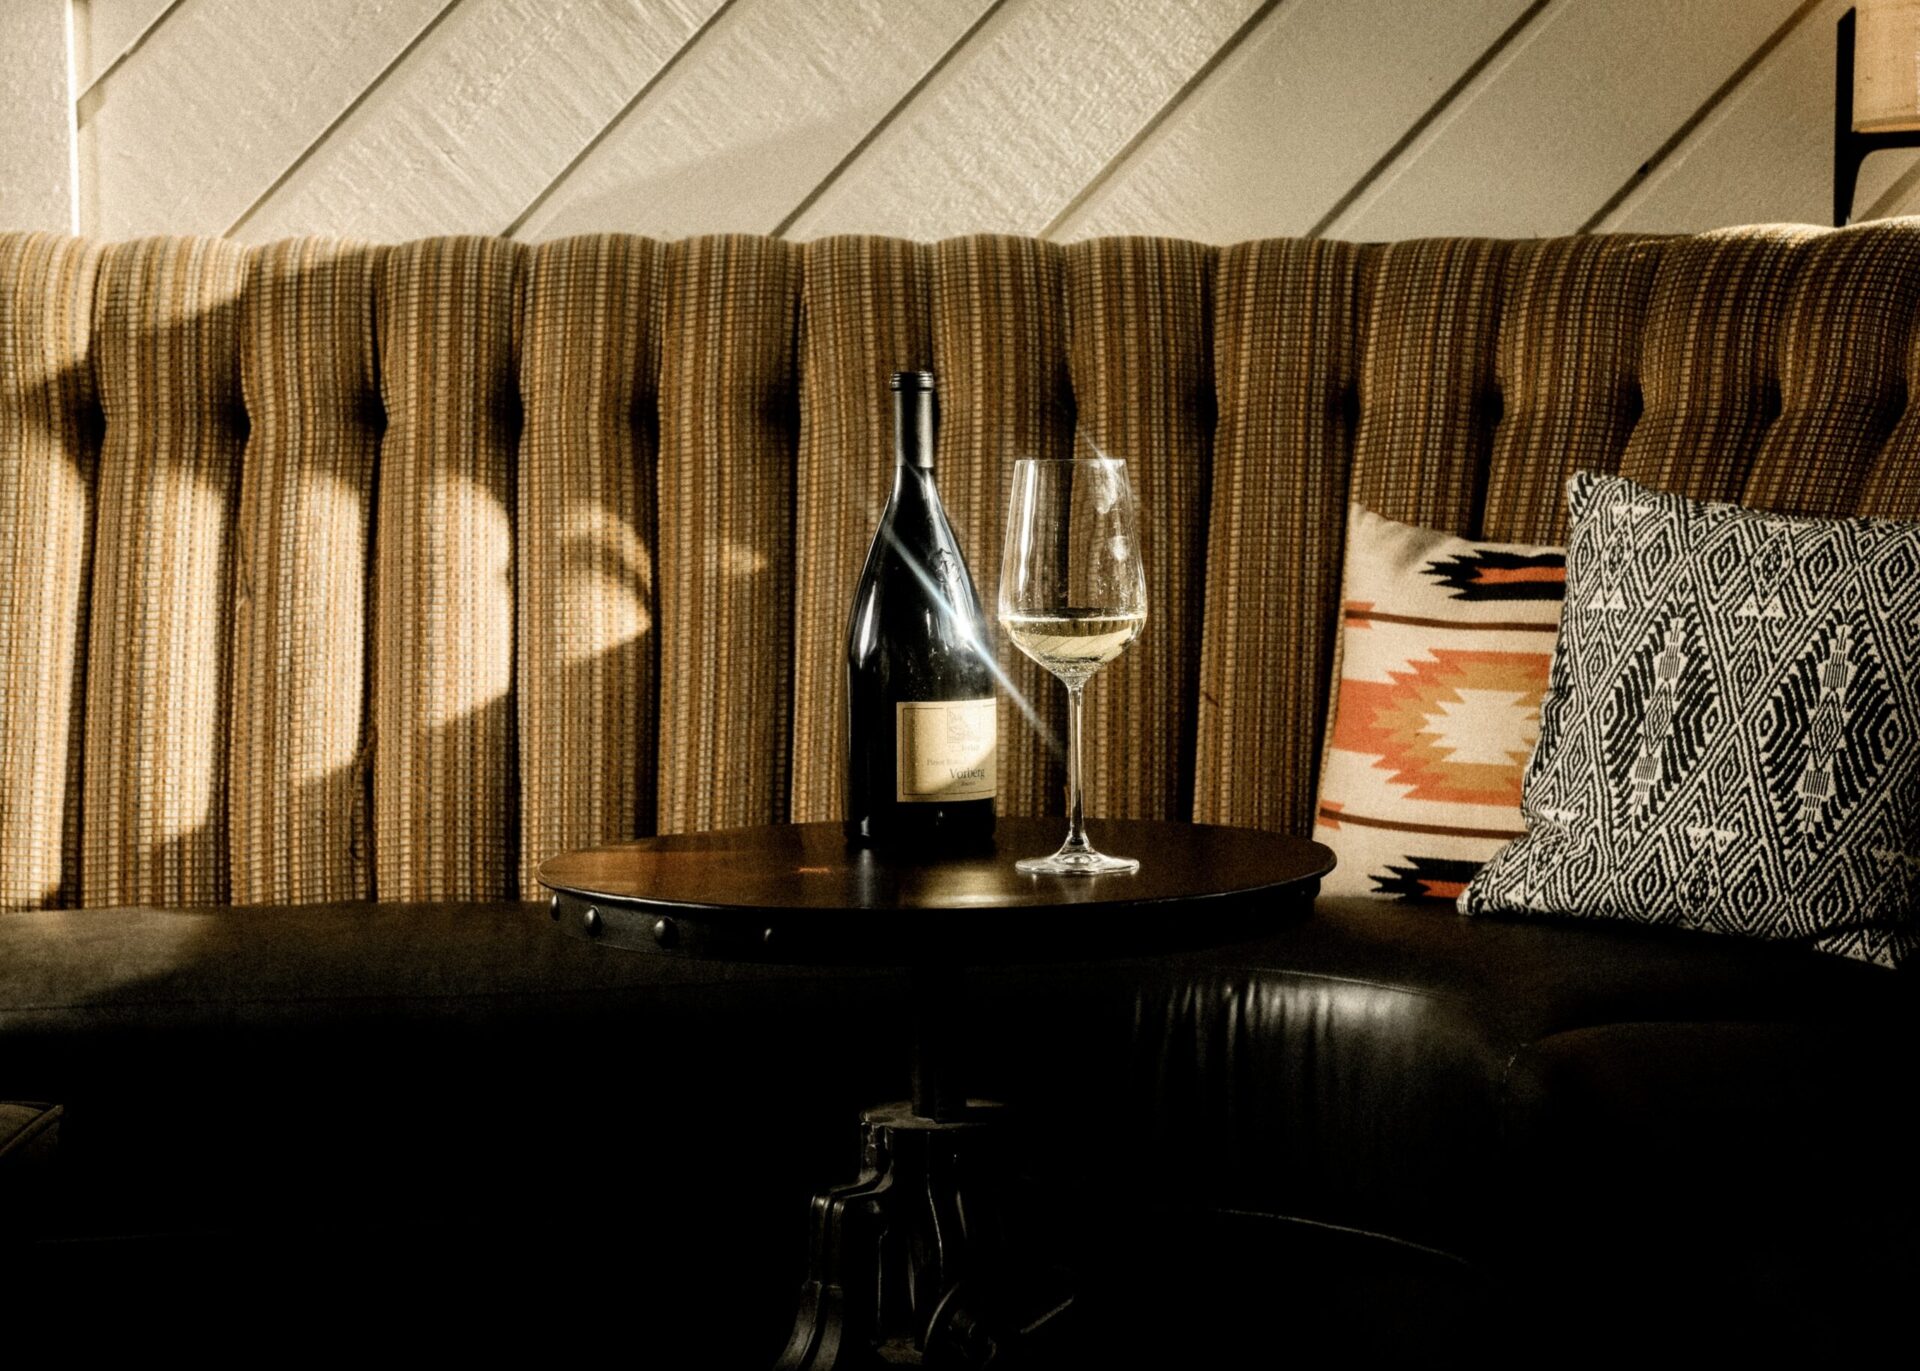 The lounge table is adorned with a black wine bottle and accompanying glass for a stylish touch.